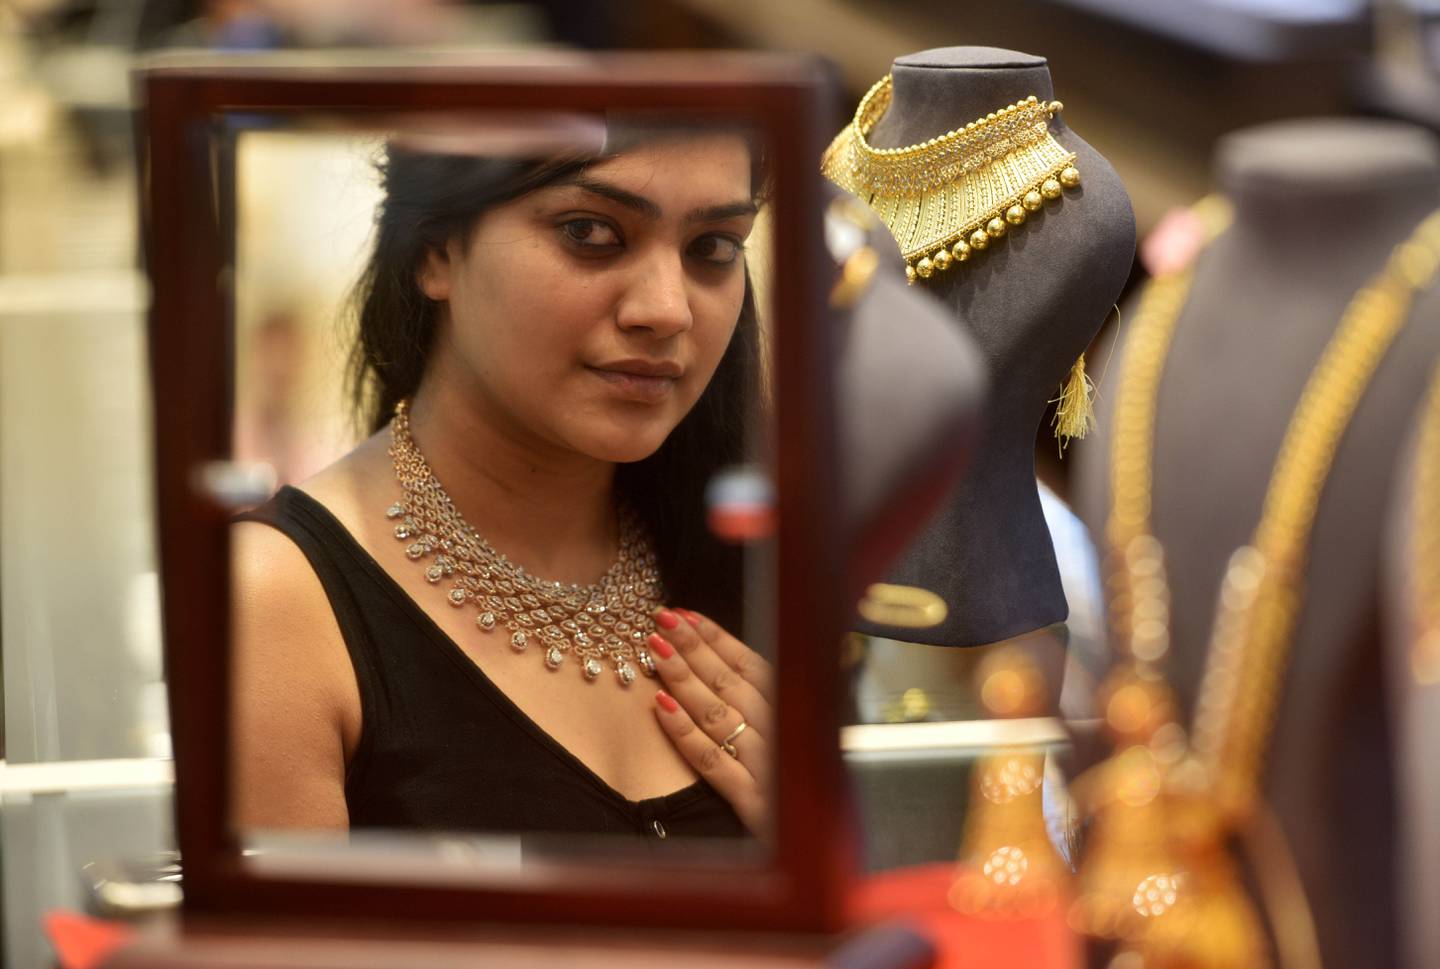 A woman buying jewellery on the occasion of Akshaya Tritiya at Kalyan Jewellers in Mumbai, India. Getty Images.